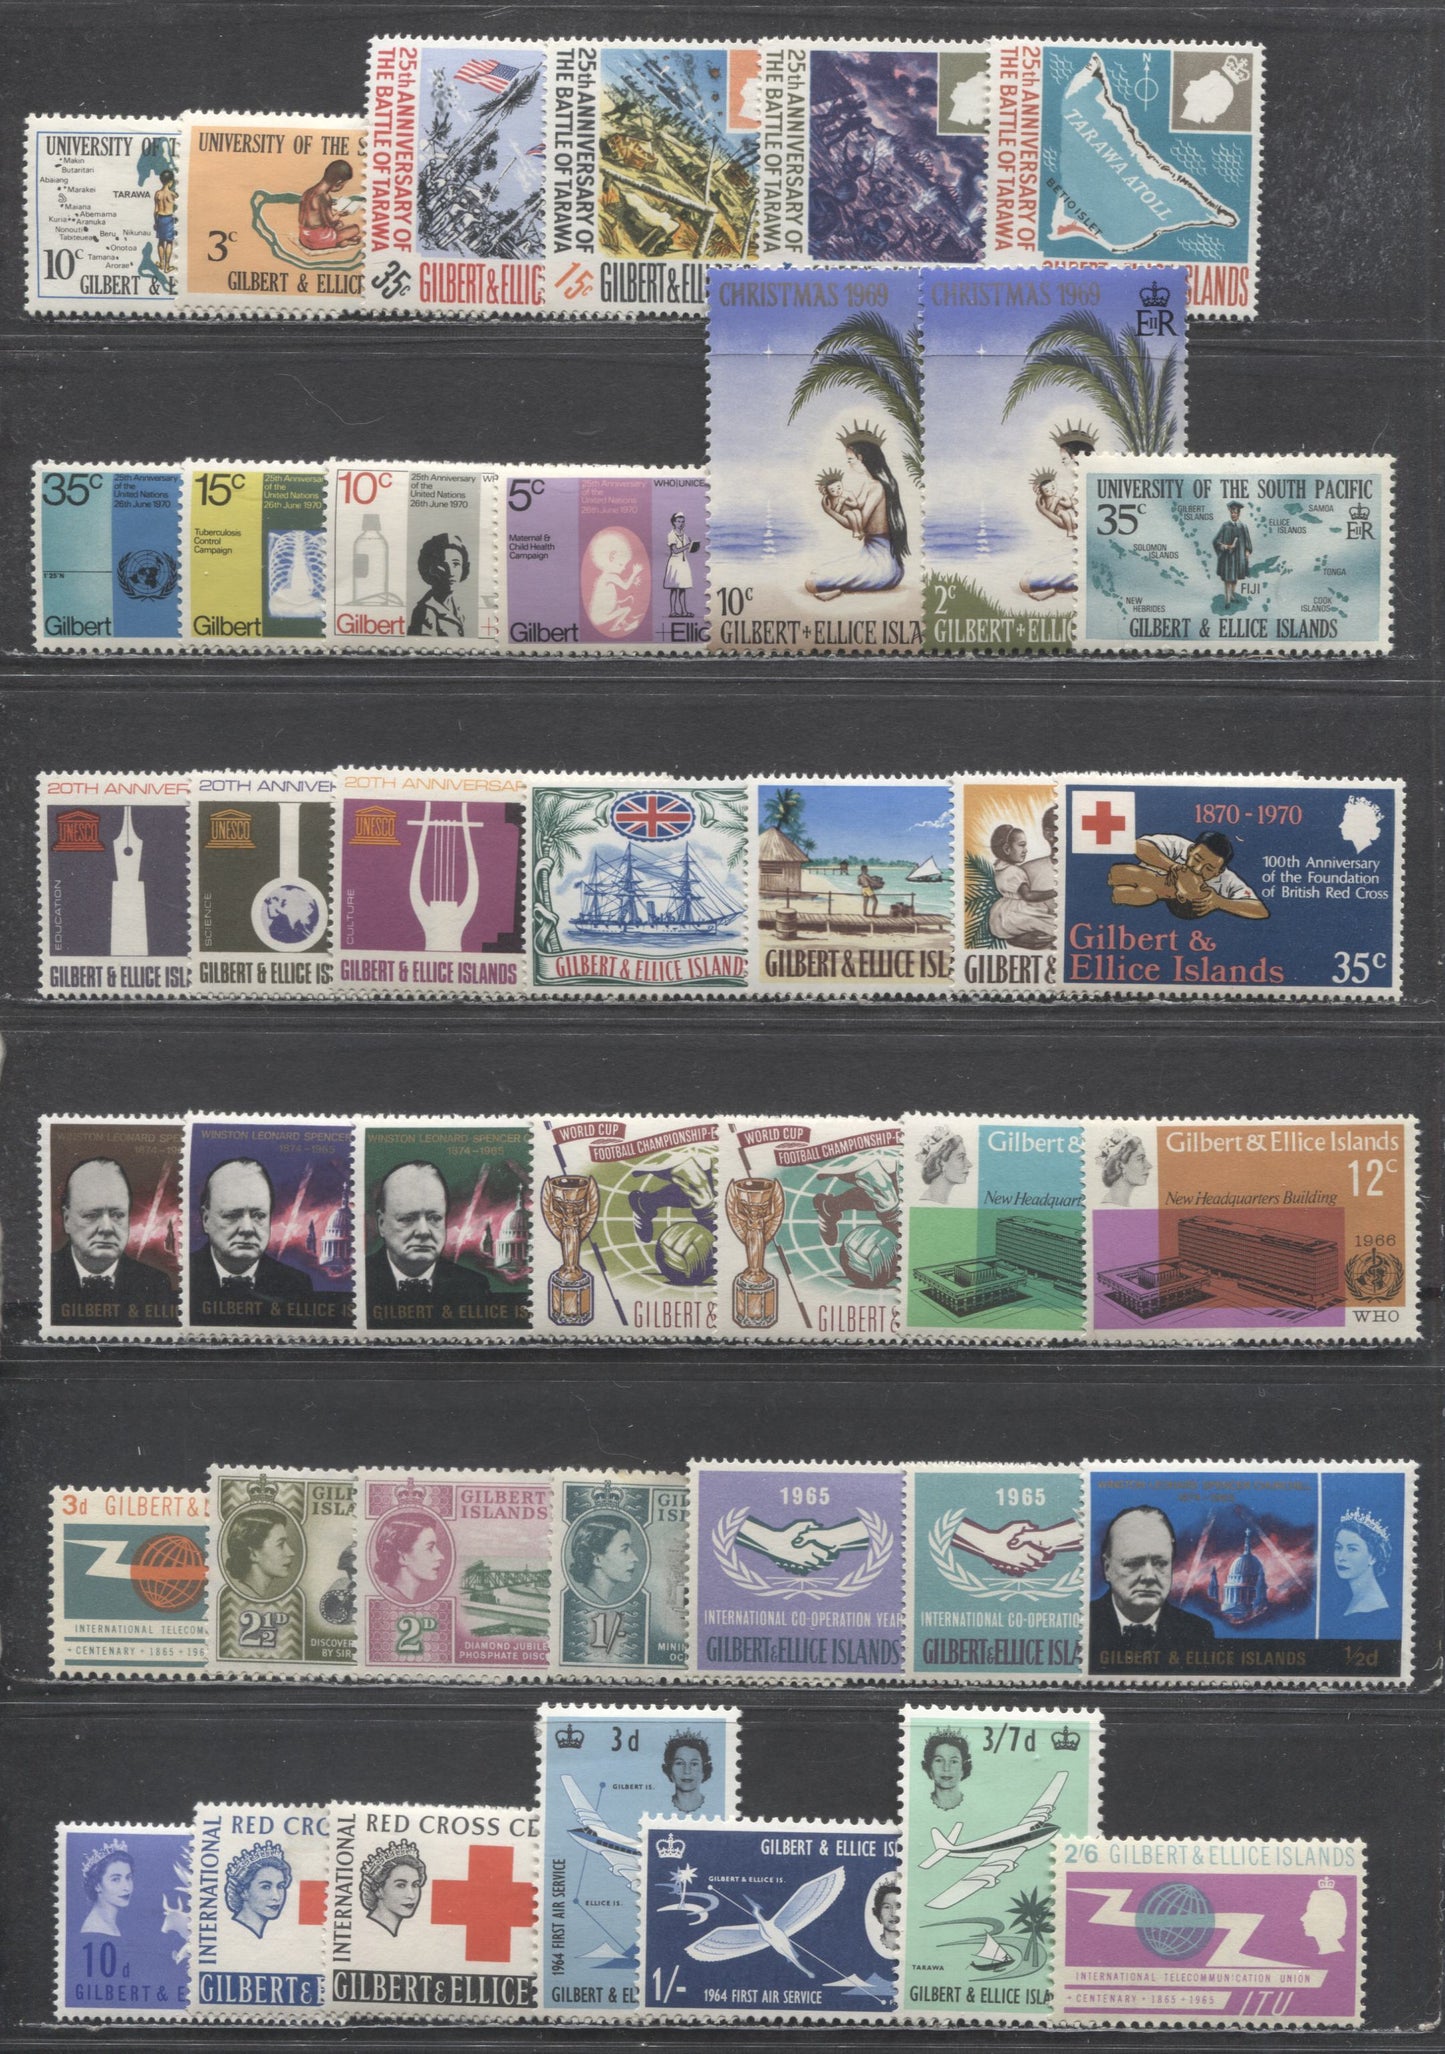 Lot 3 Gilbert & Ellice Islands SC#73/161 1960-1970 60th Anniversary Of Phosphate Discovery - 25th Anniversary Of United Nations, 41 F/VFOG Singles, Click on Listing to See ALL Pictures, Estimated Value $10